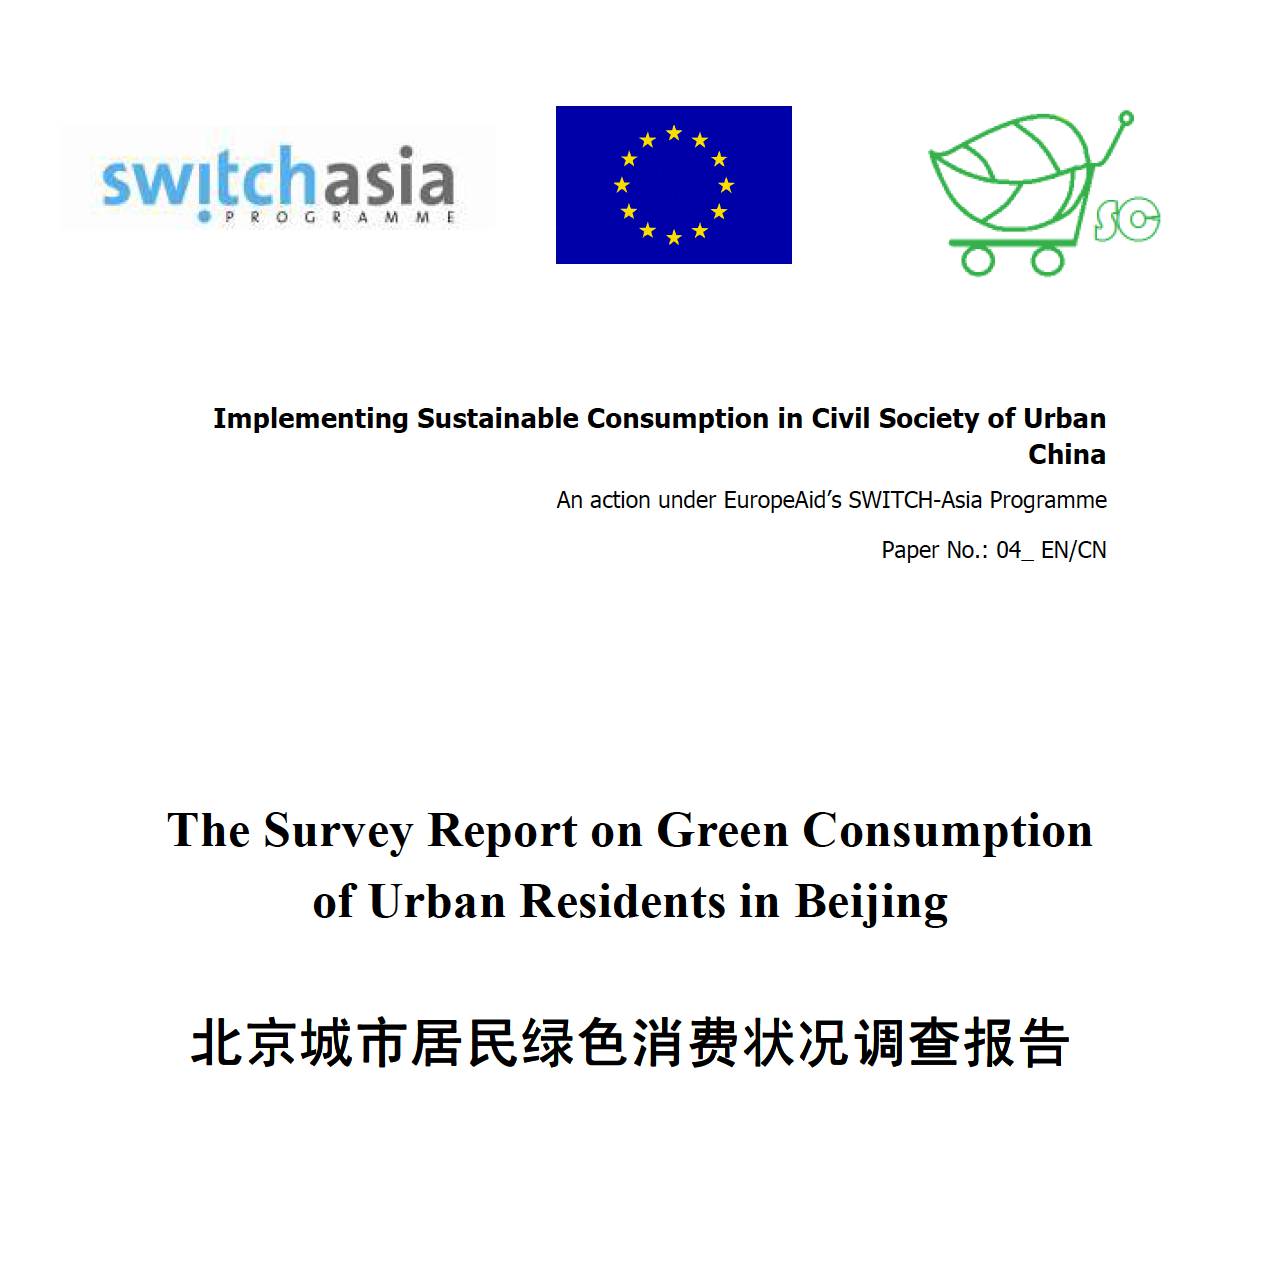 The Survey Report on Green Consumption of Urban Residents in Beijing